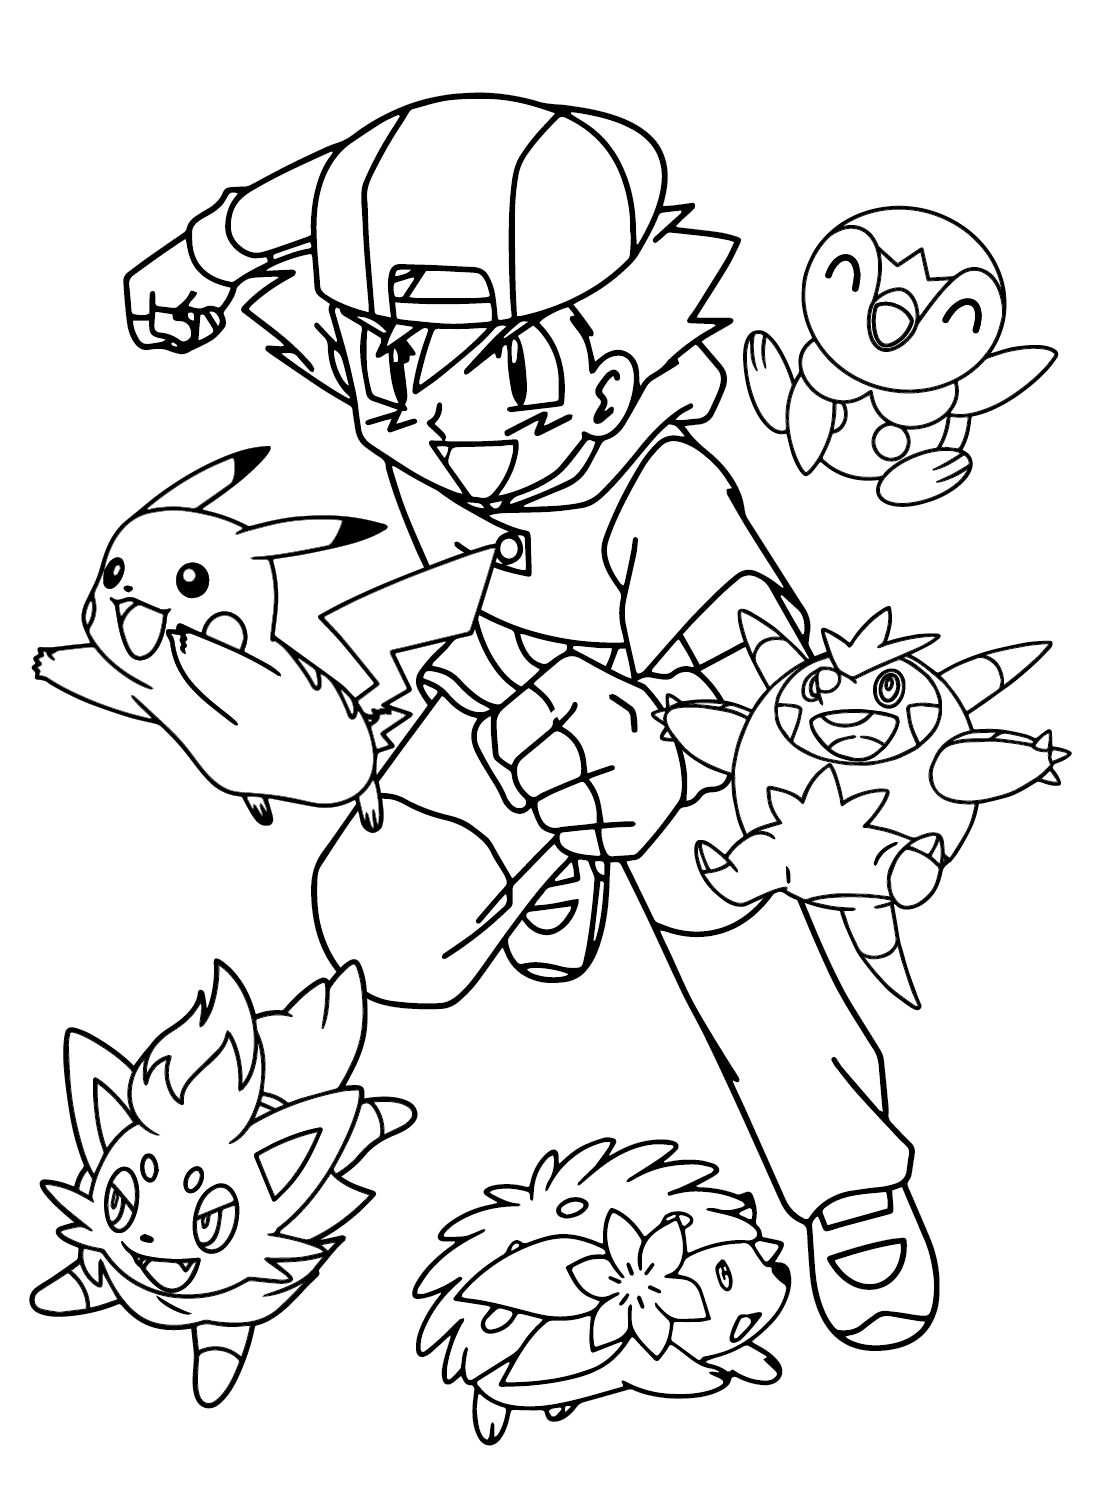 Ash Ketchum Coloring Pages to Drawing - Free Printable Coloring Pages